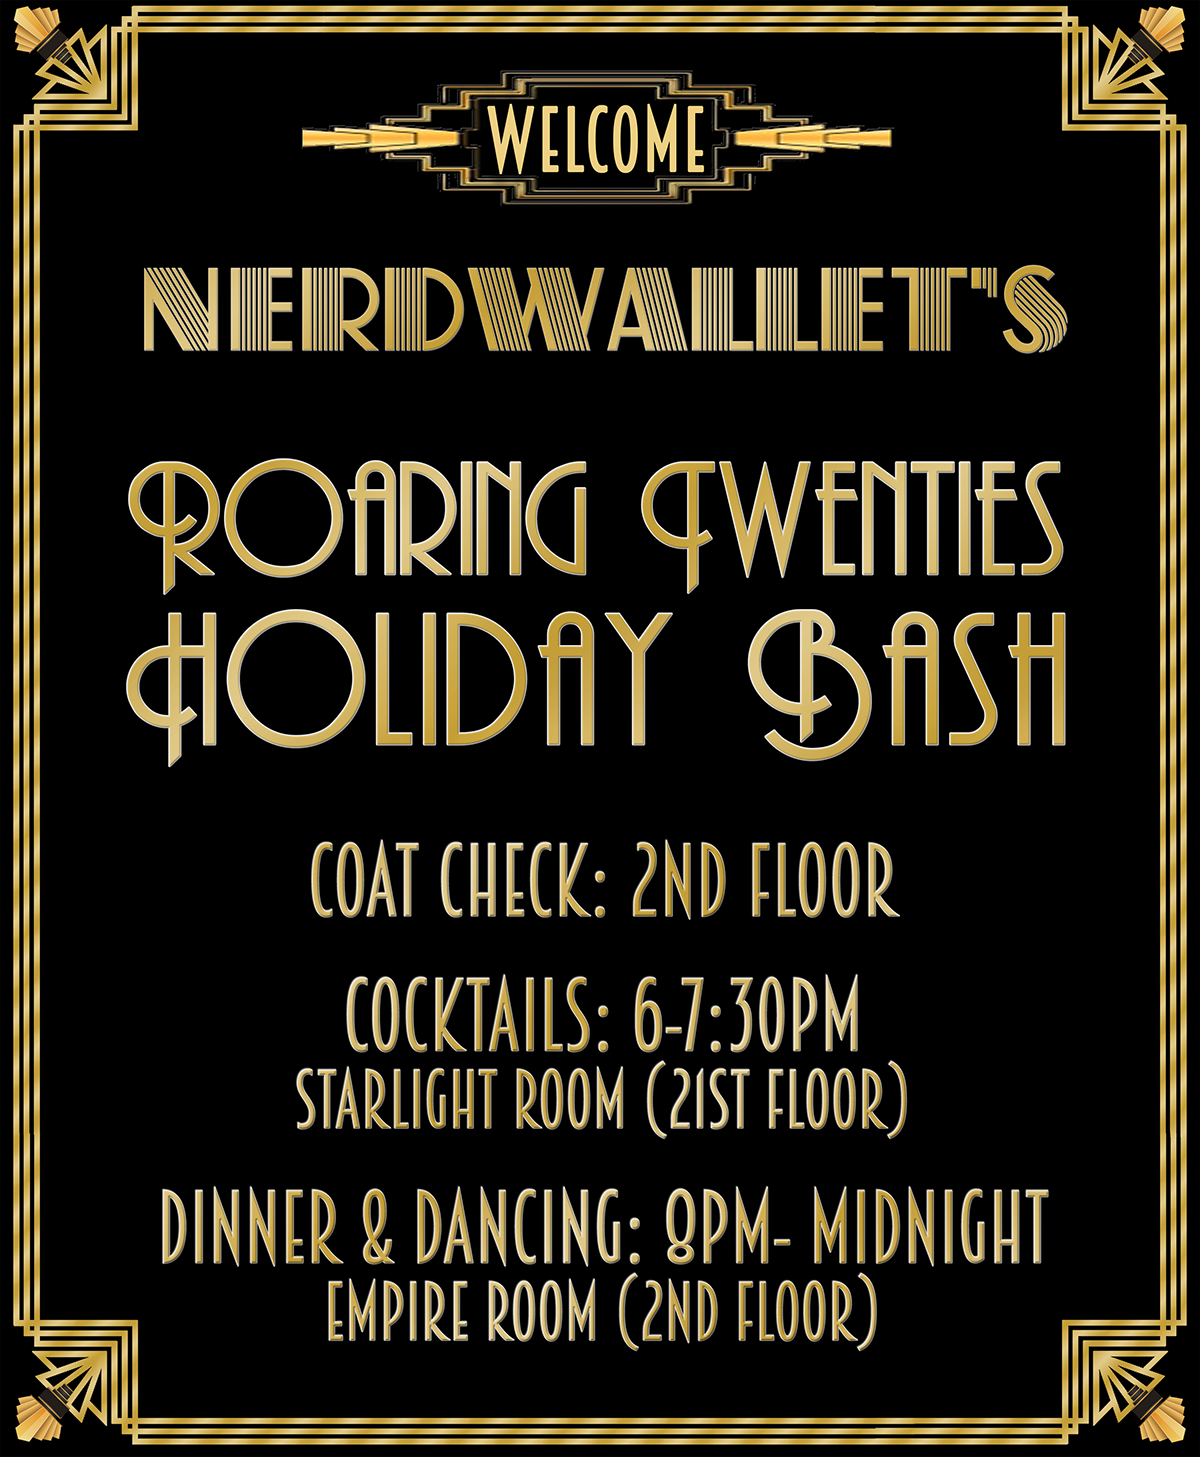 nerdwallet poster holiday party